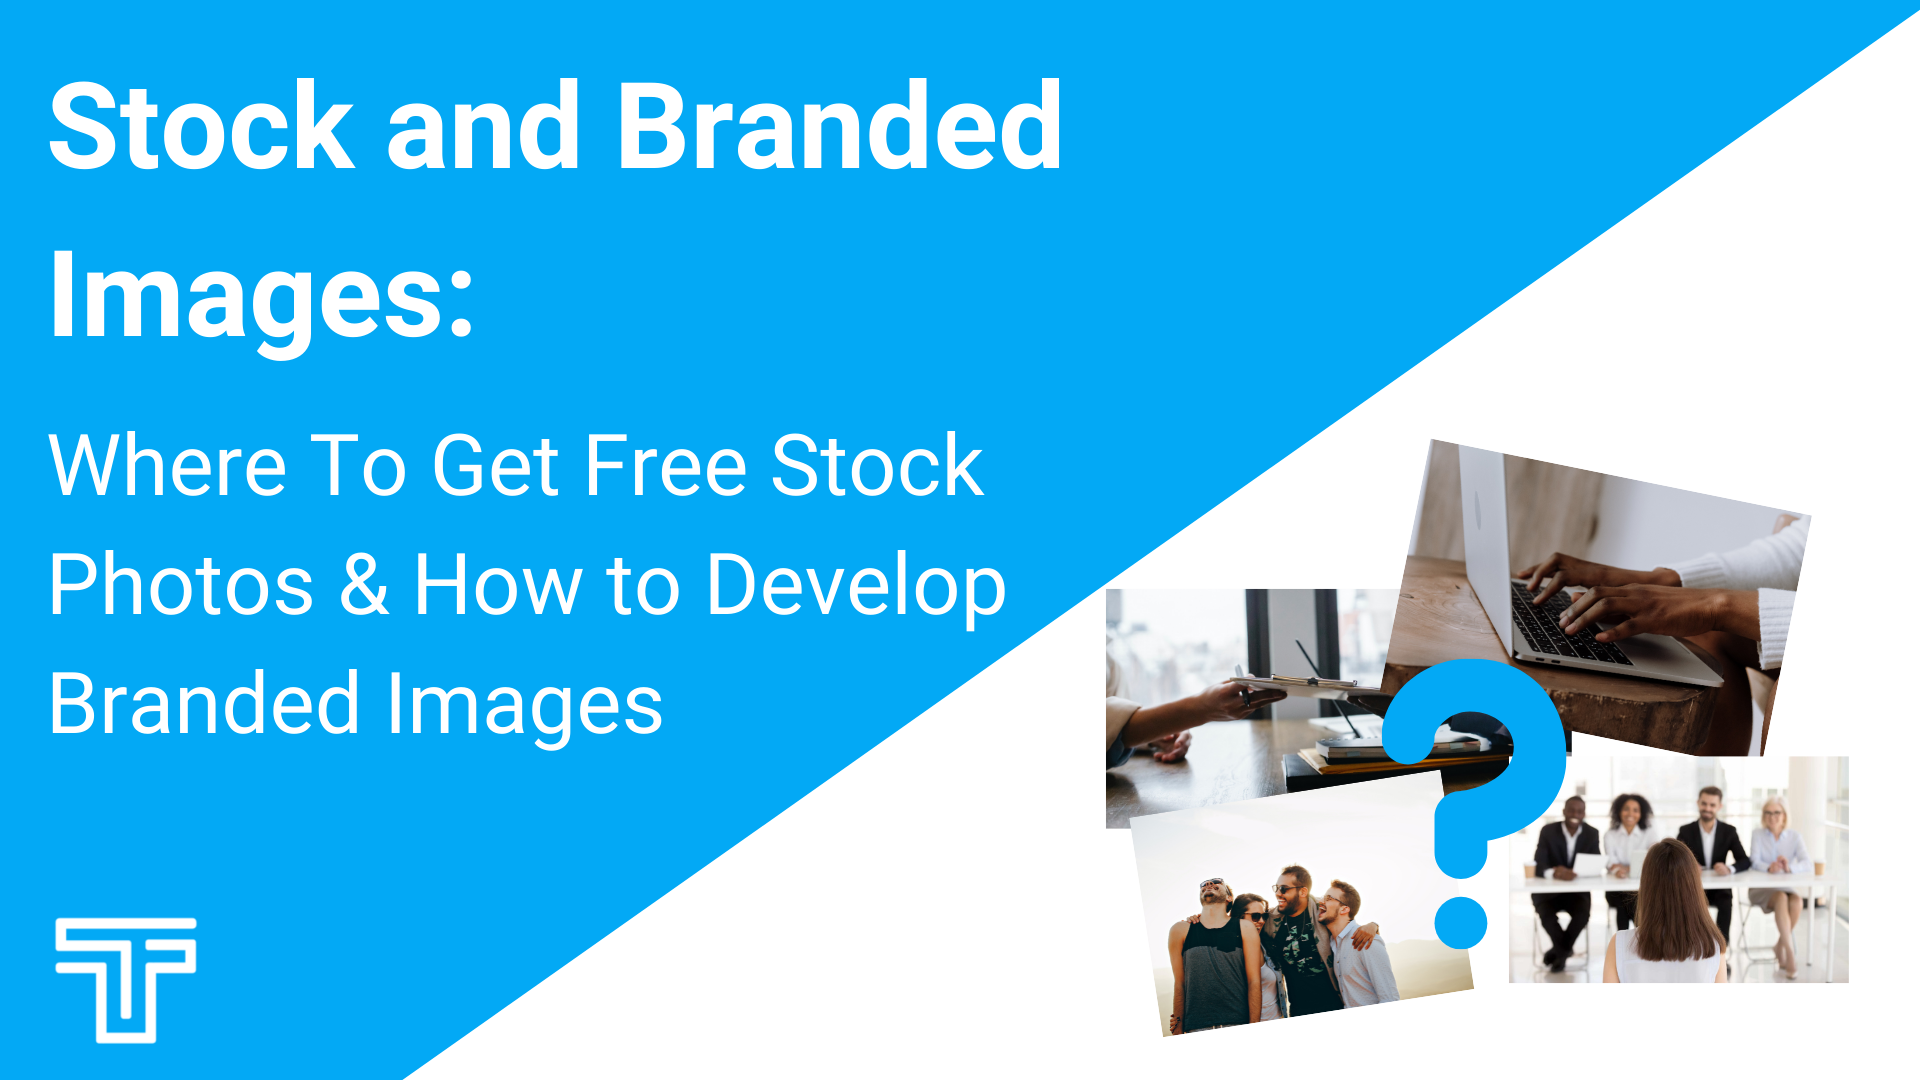 where-to-get-free-stock-photos-how-to-develop-branded-images